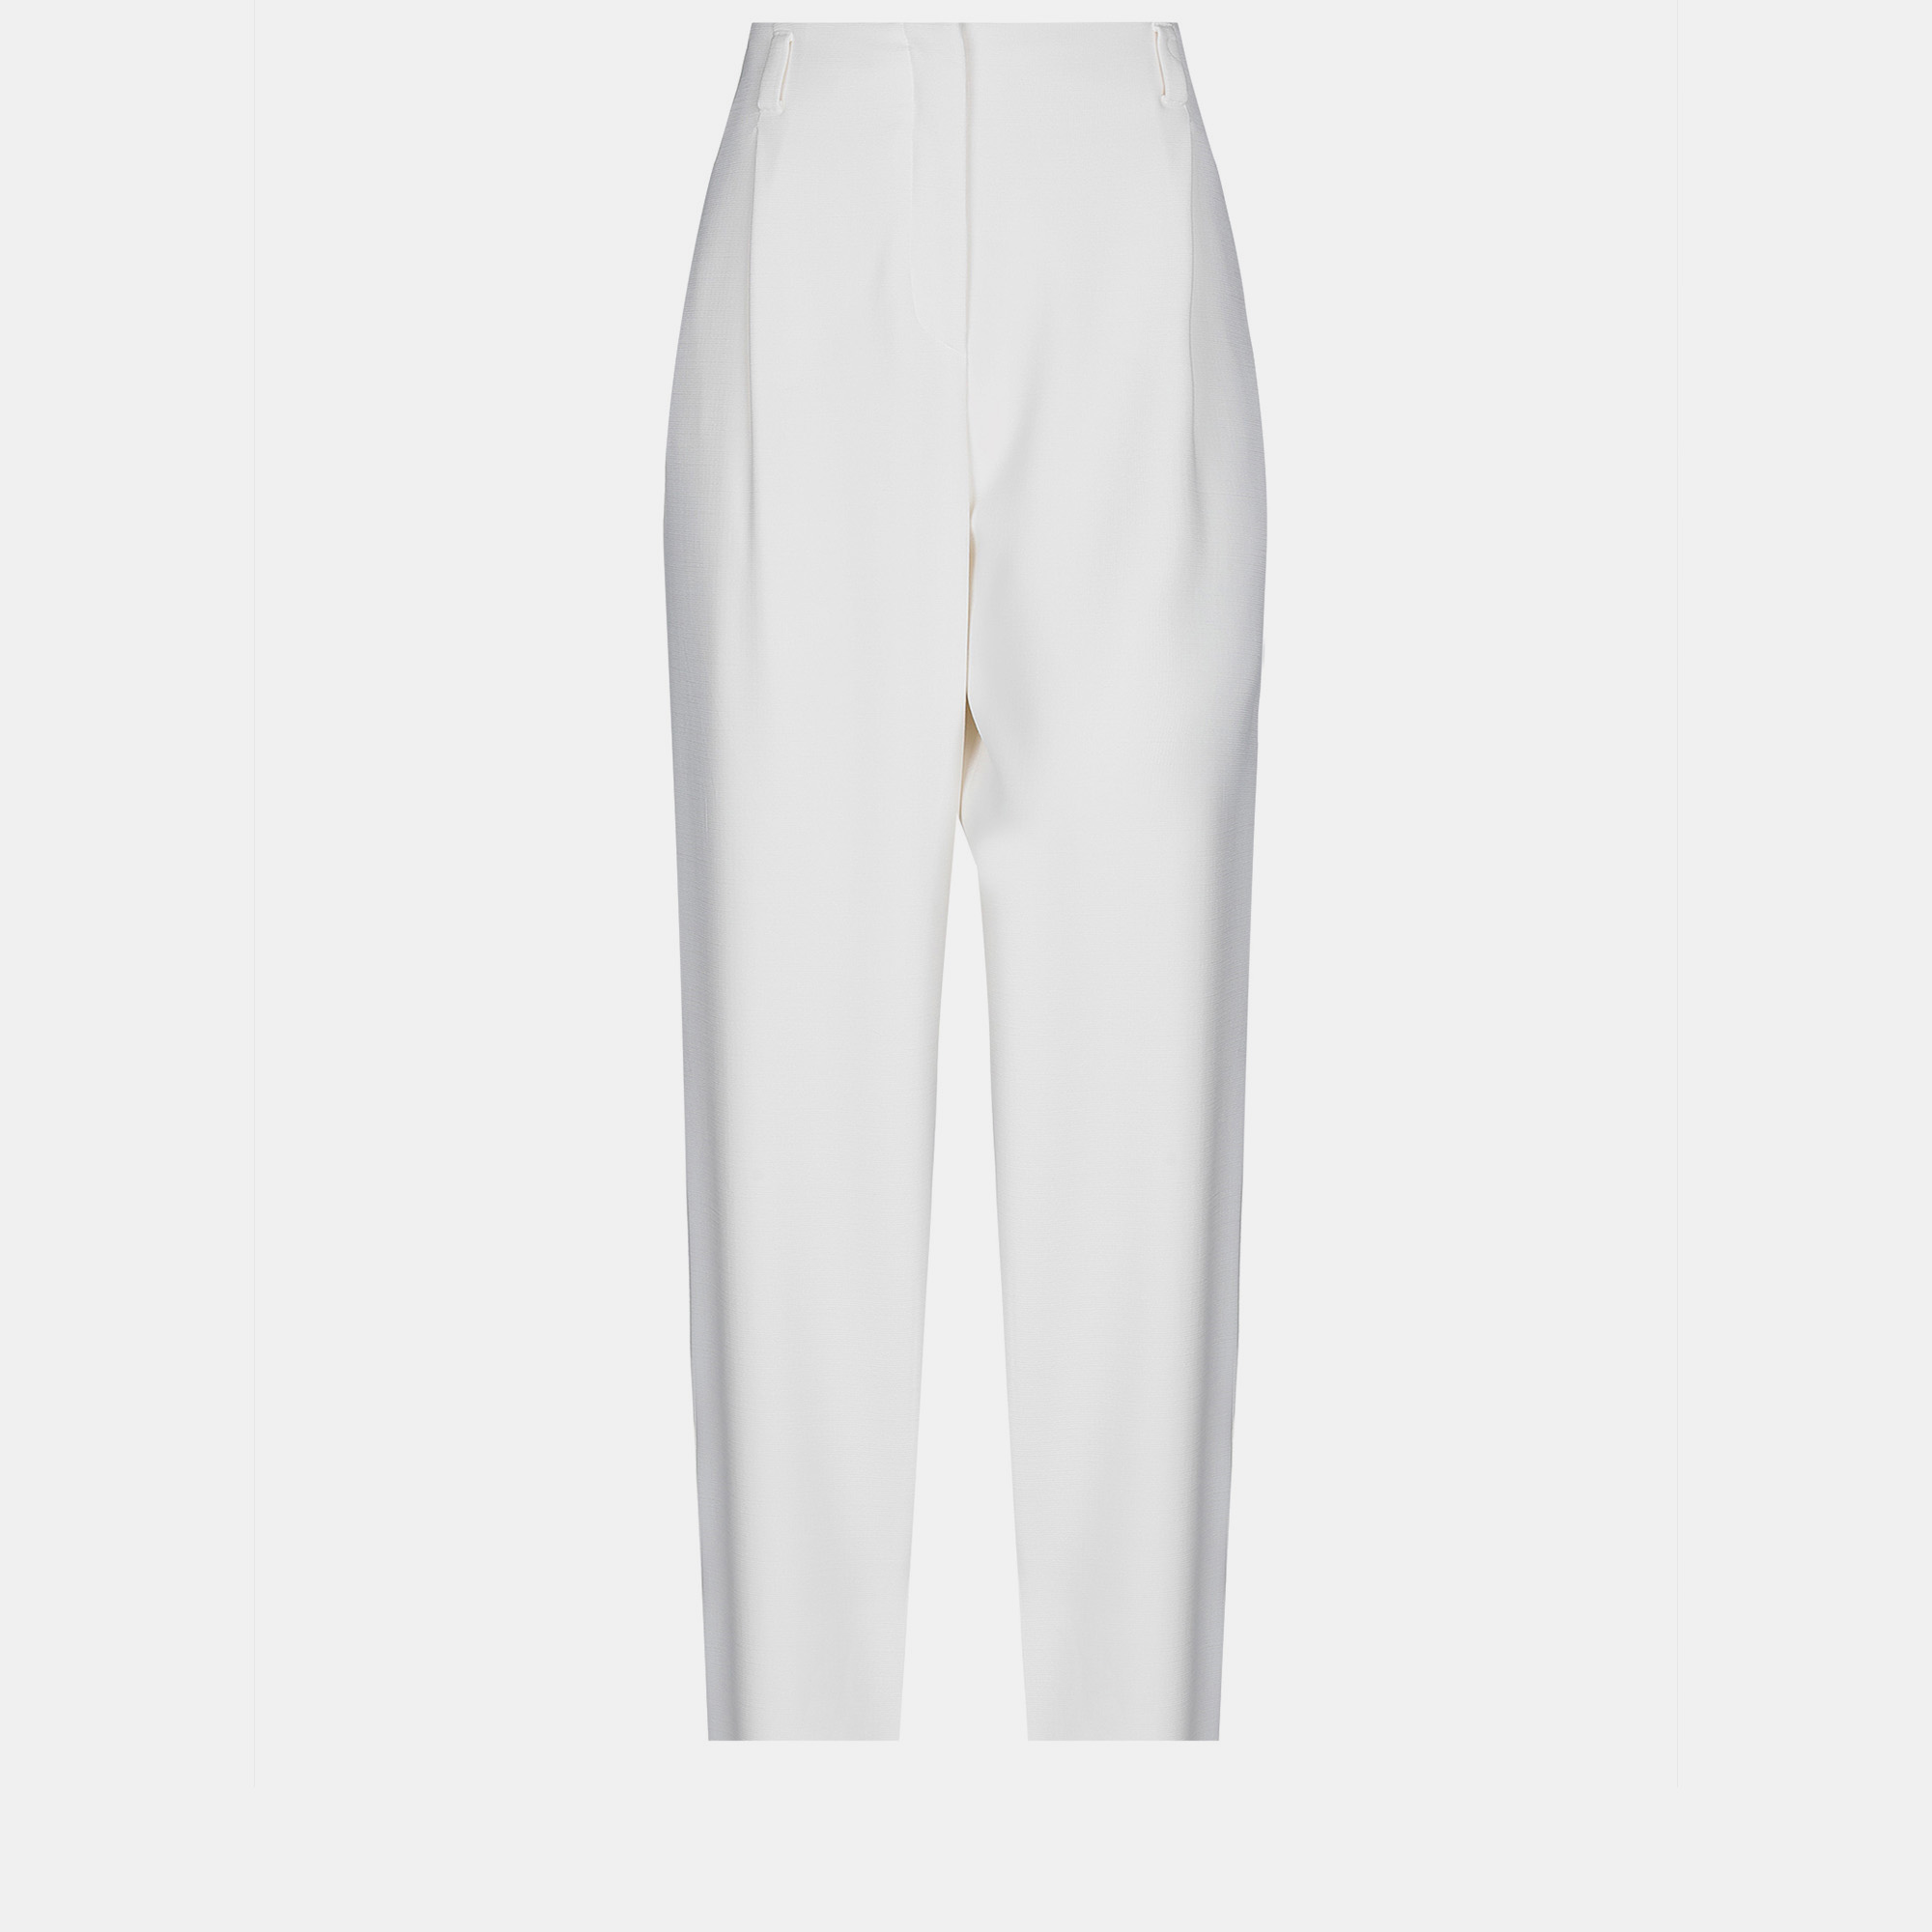 Giorgio armani ivory wool blend tapered pants s (it 38)